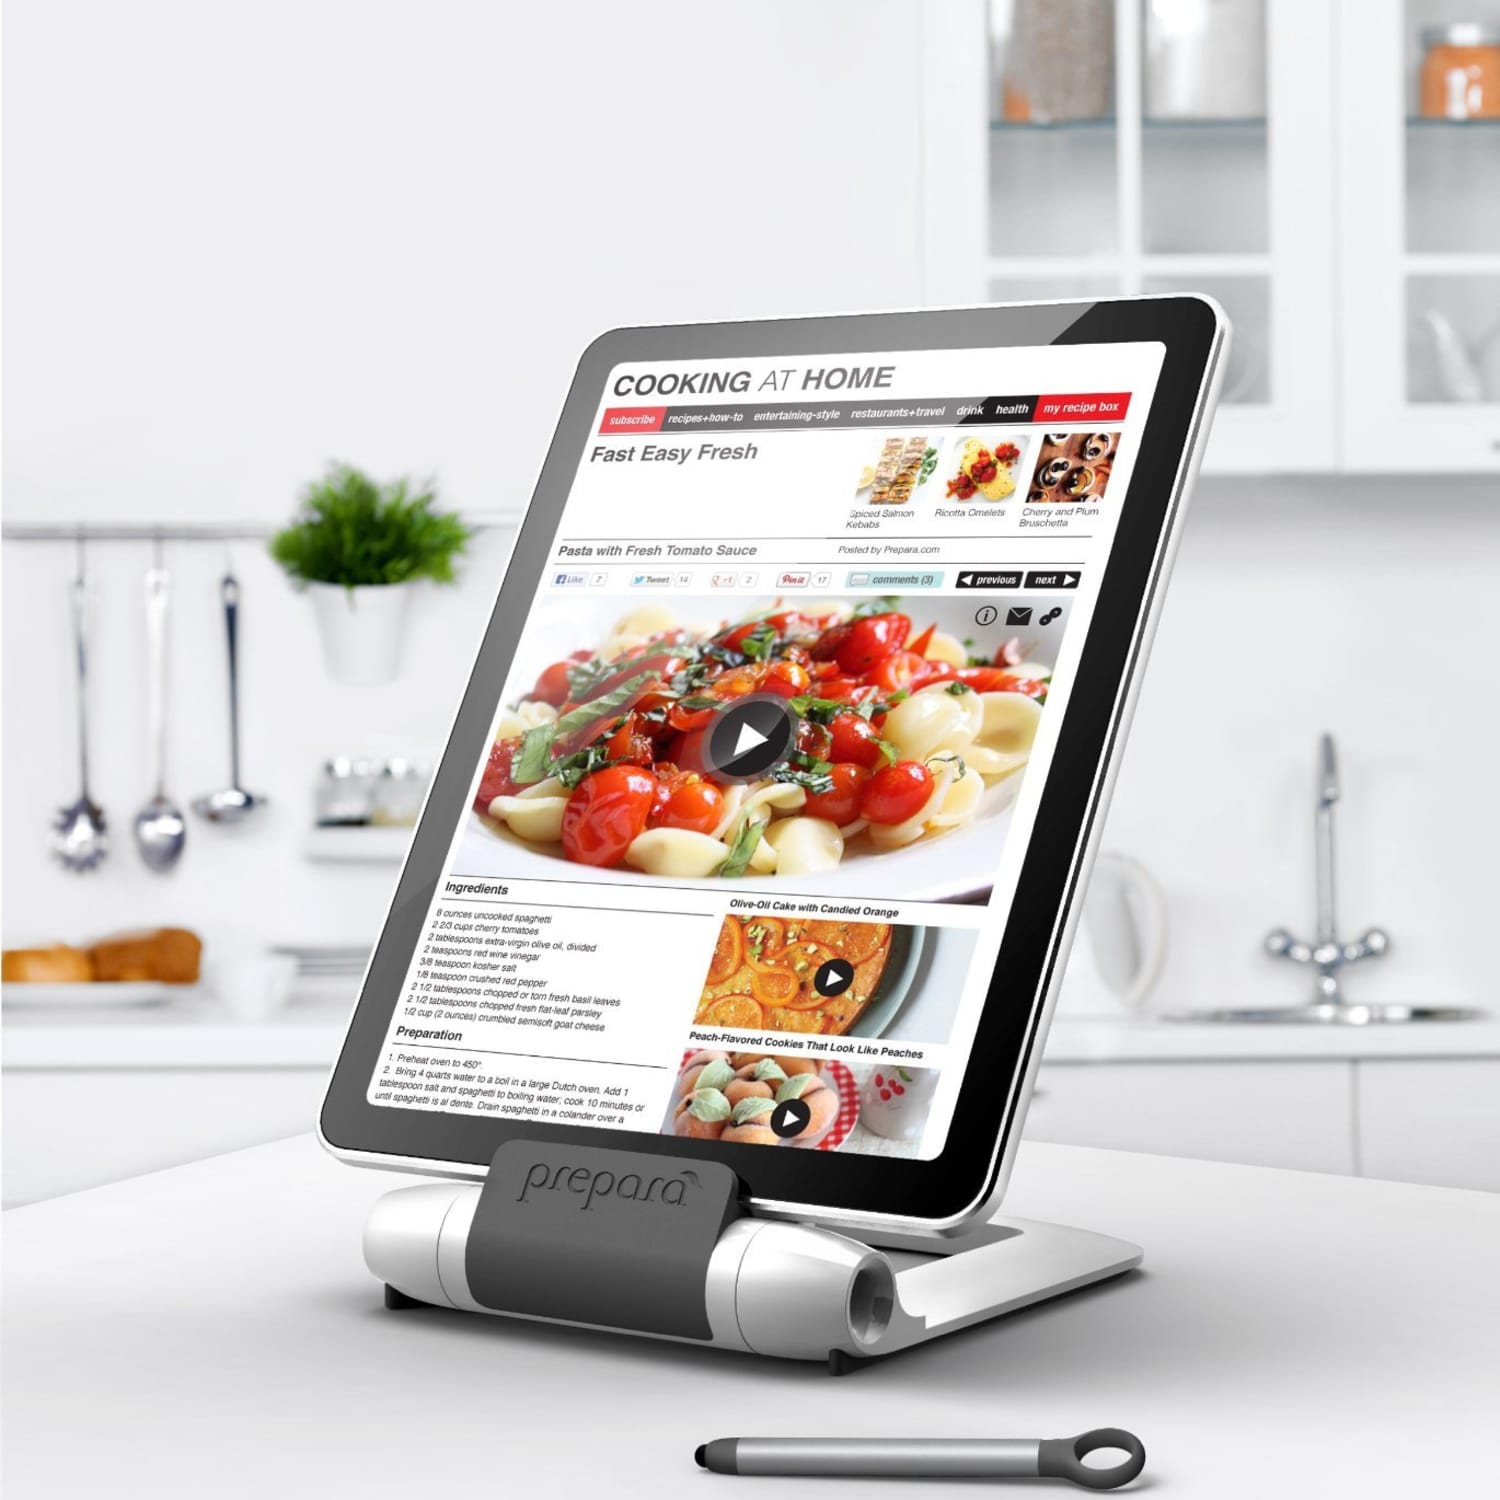 8 Ipad And Tablet Stands Made For Cooking In The Kitchen Kitchn